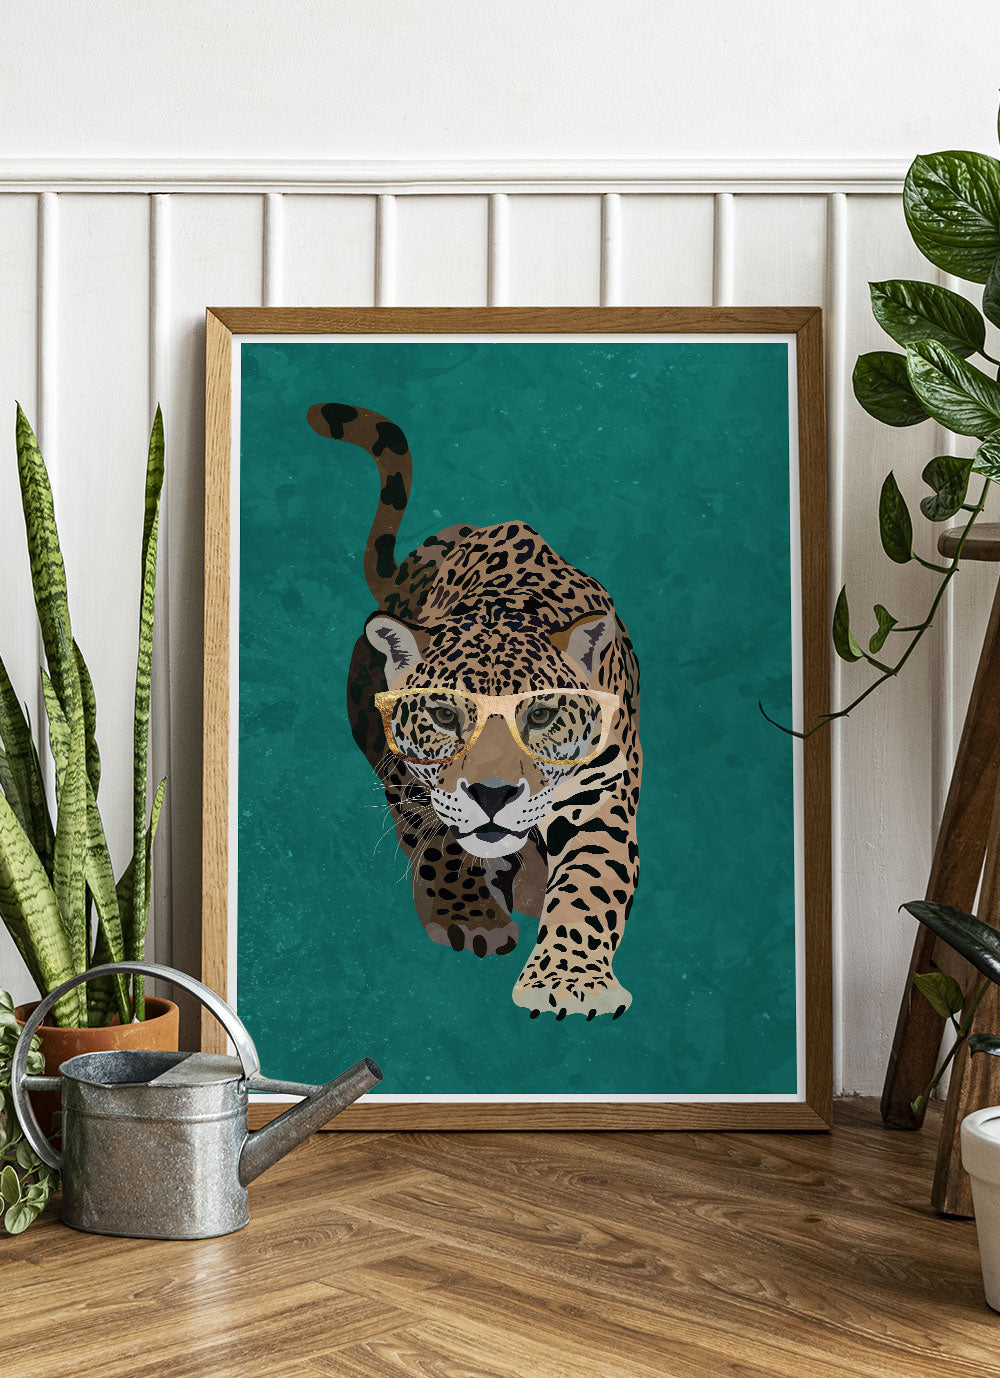 Cool Leopard Art Print by Sarah Manovski in a quirky interior space with house plants